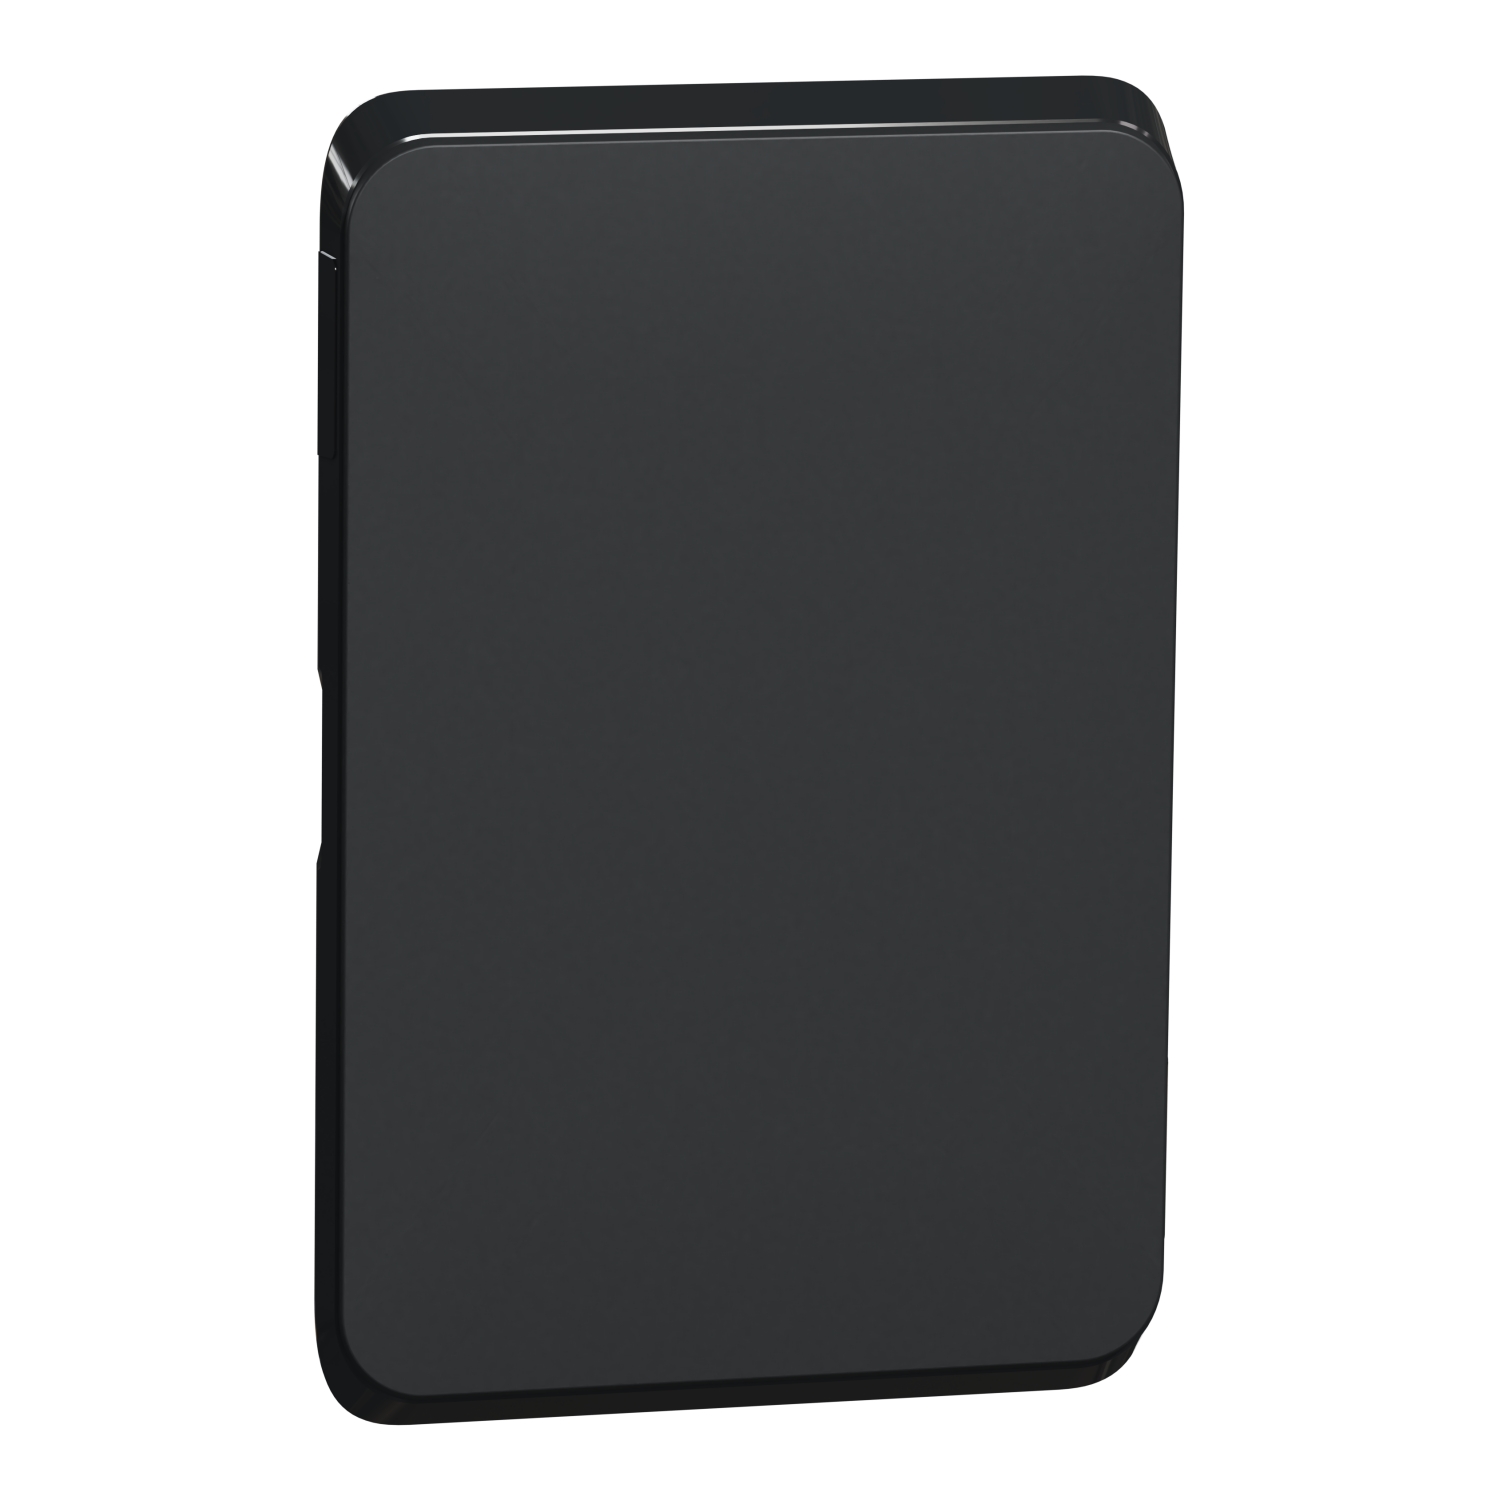 PDL Iconic - Cover Plate Blank Plate - Solid Black